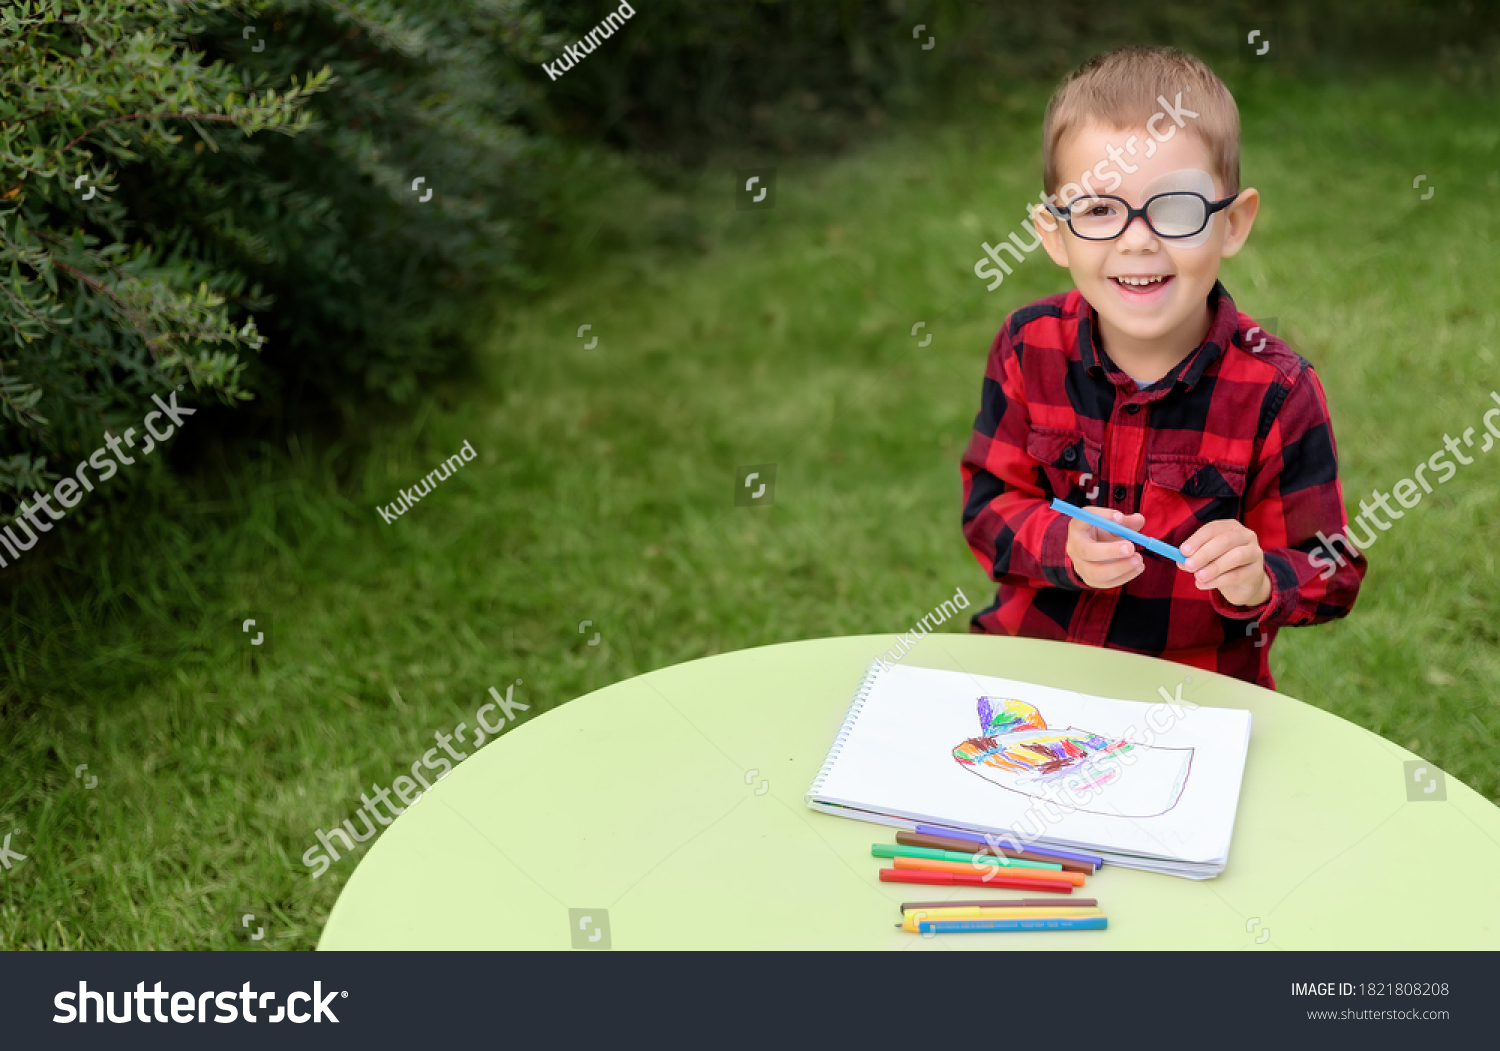 A little boy drawing a picture in the garden (outdoors). Wearing glasses and an eye patch (plaster, occluder) to prevent amblyopia and strabismus (squint, lazy eye). Child vision disease problem. #1821808208